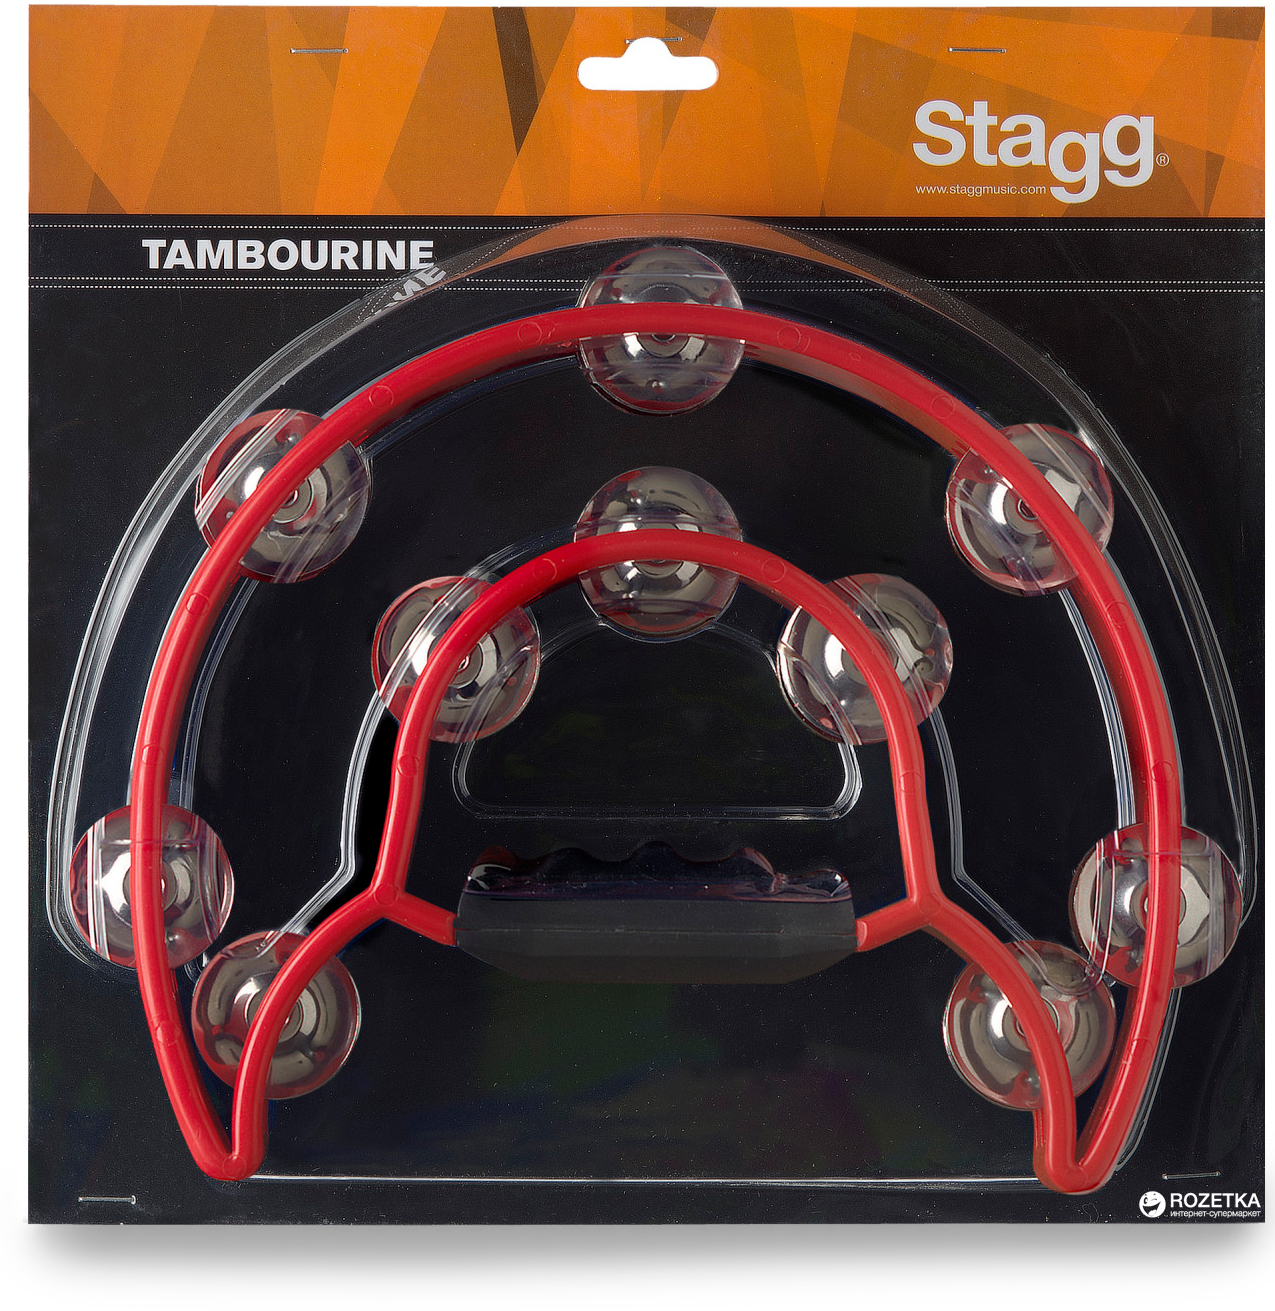 Stagg Tab-1 Rd Tambourin En Plastique Avec 20 Cymbalettes Rouge - Shake percussions - Variation 1